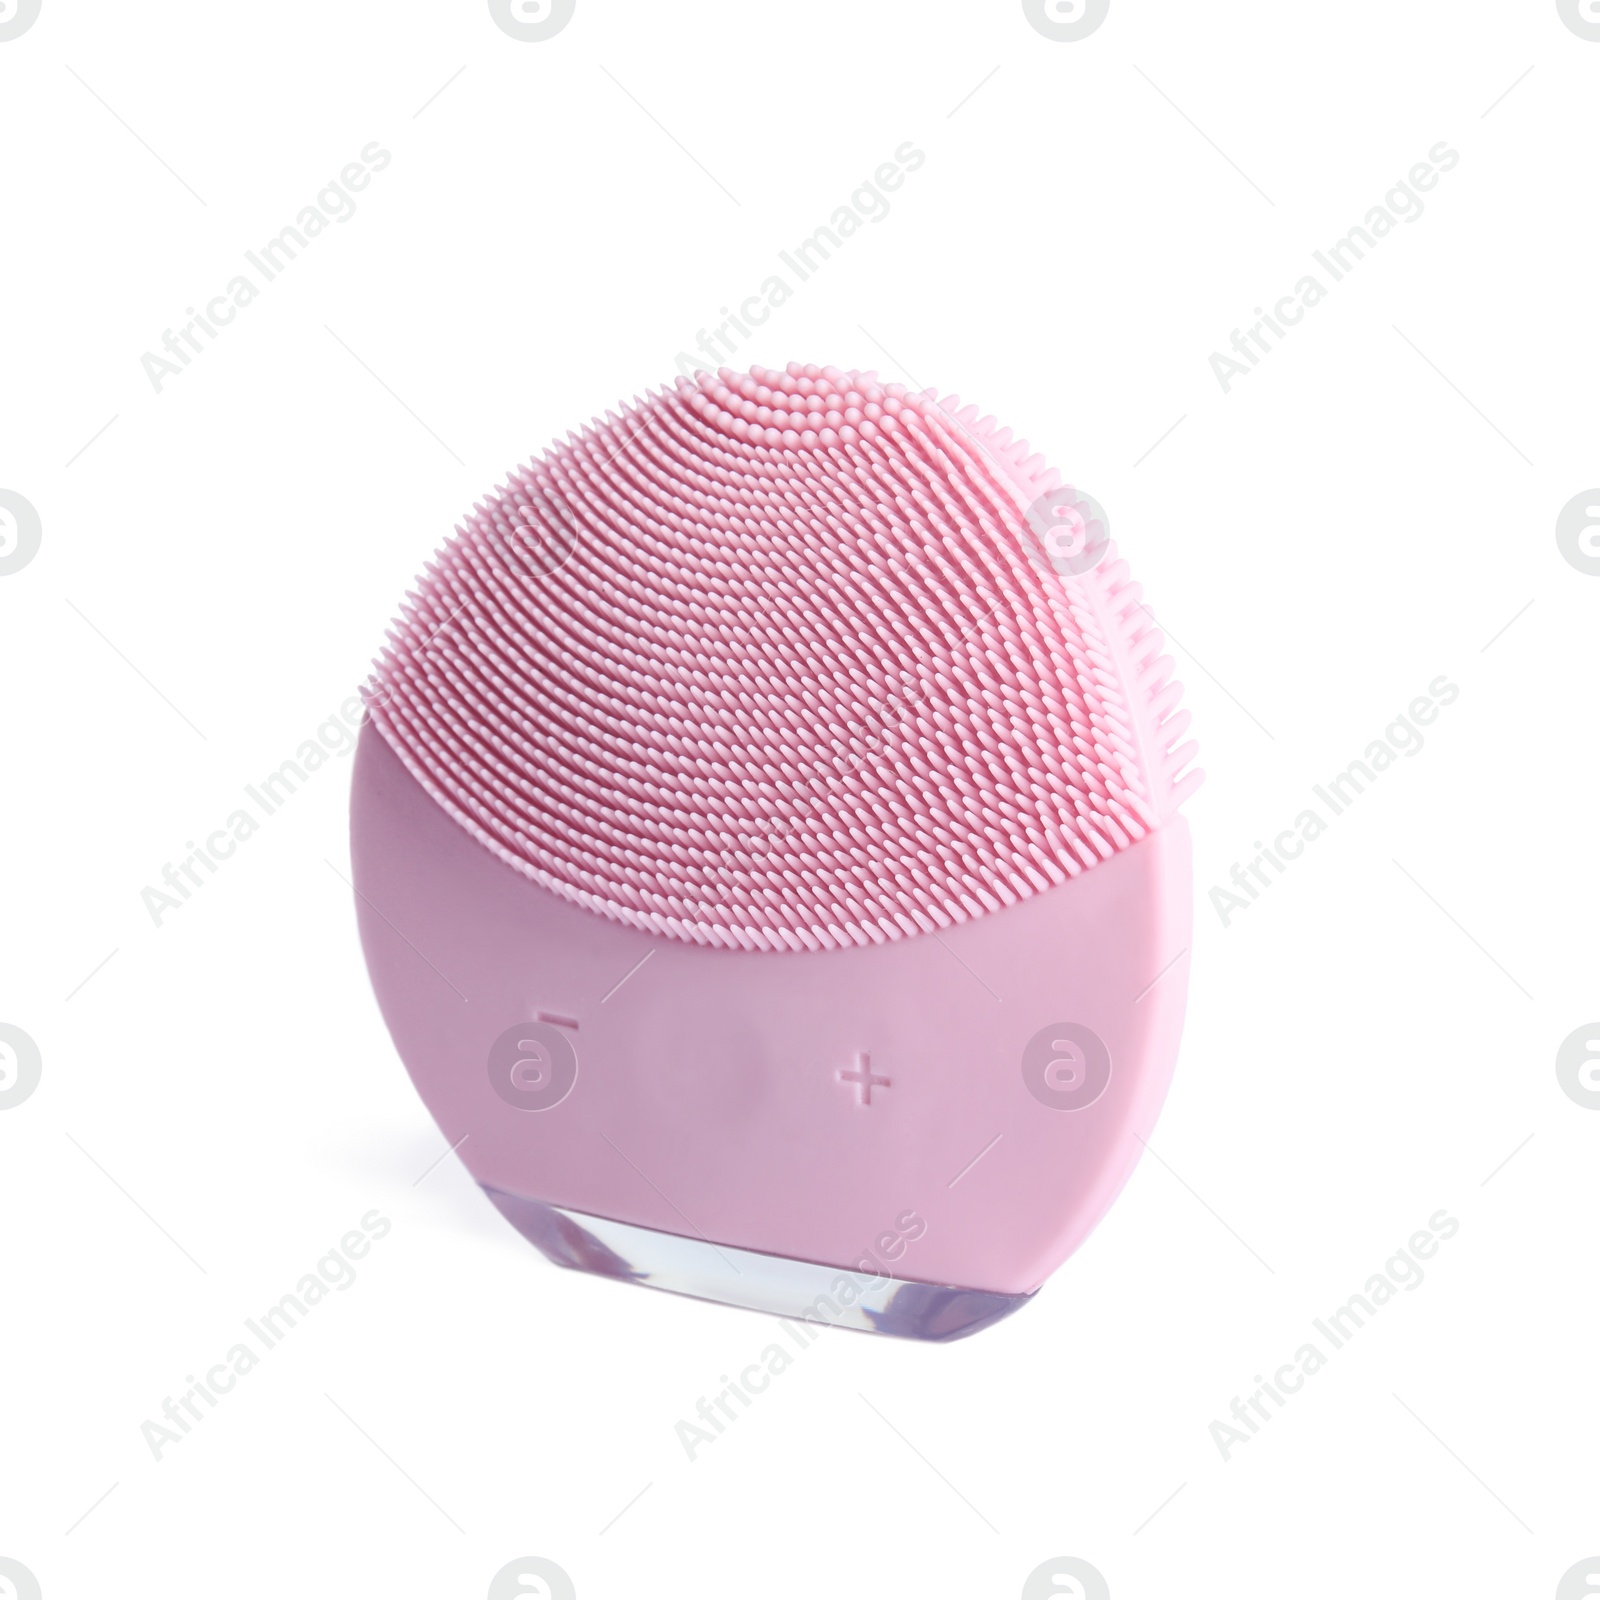 Photo of Modern silicone face cleansing brush isolated on white. Cosmetics tool